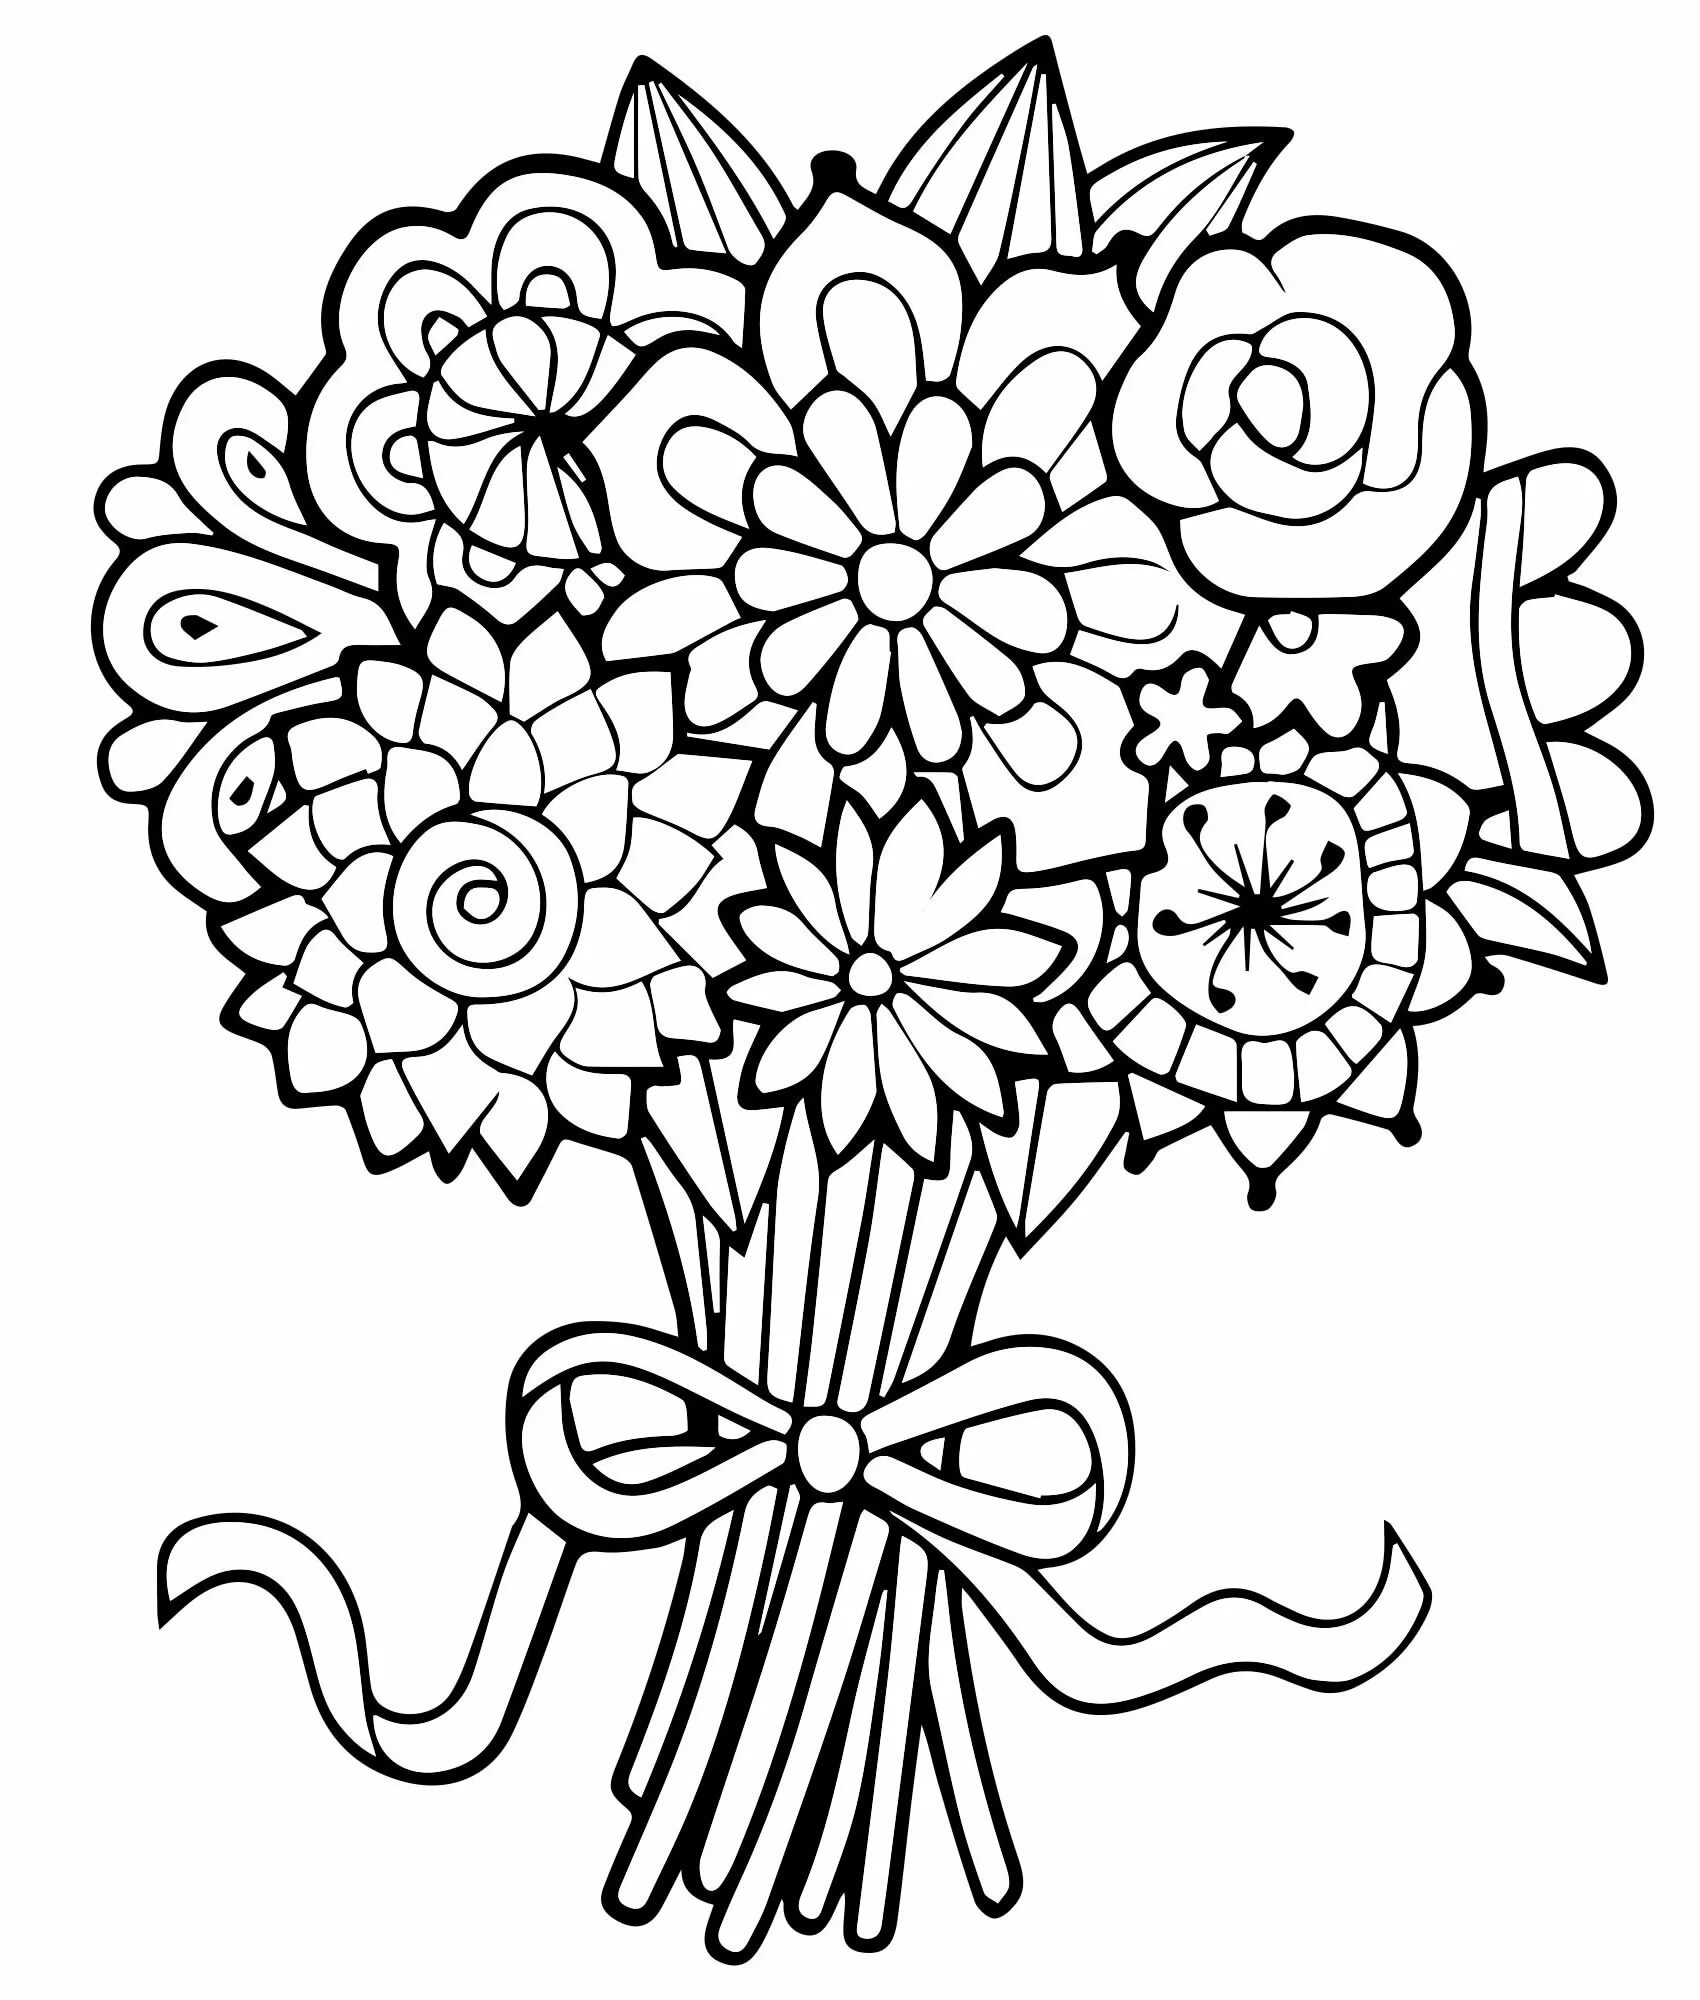 Coloring book glowing bouquet for mom